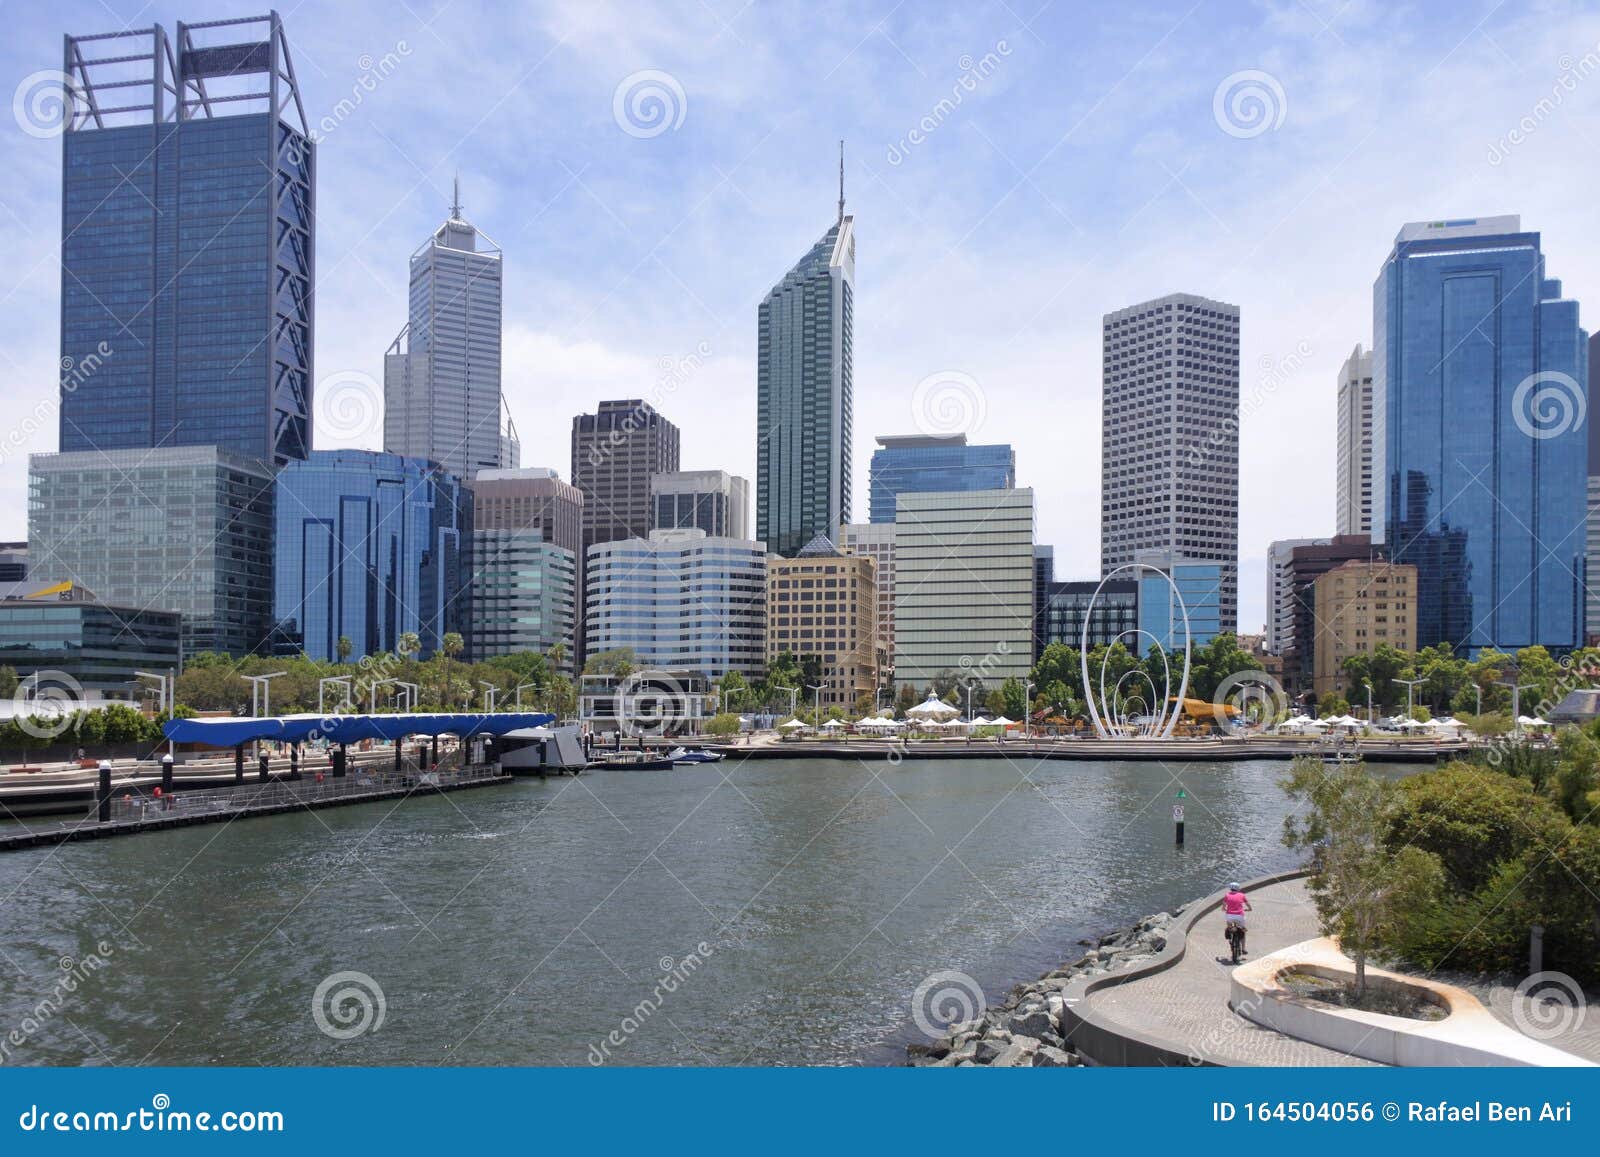 perth business district skyline from elizabeth que